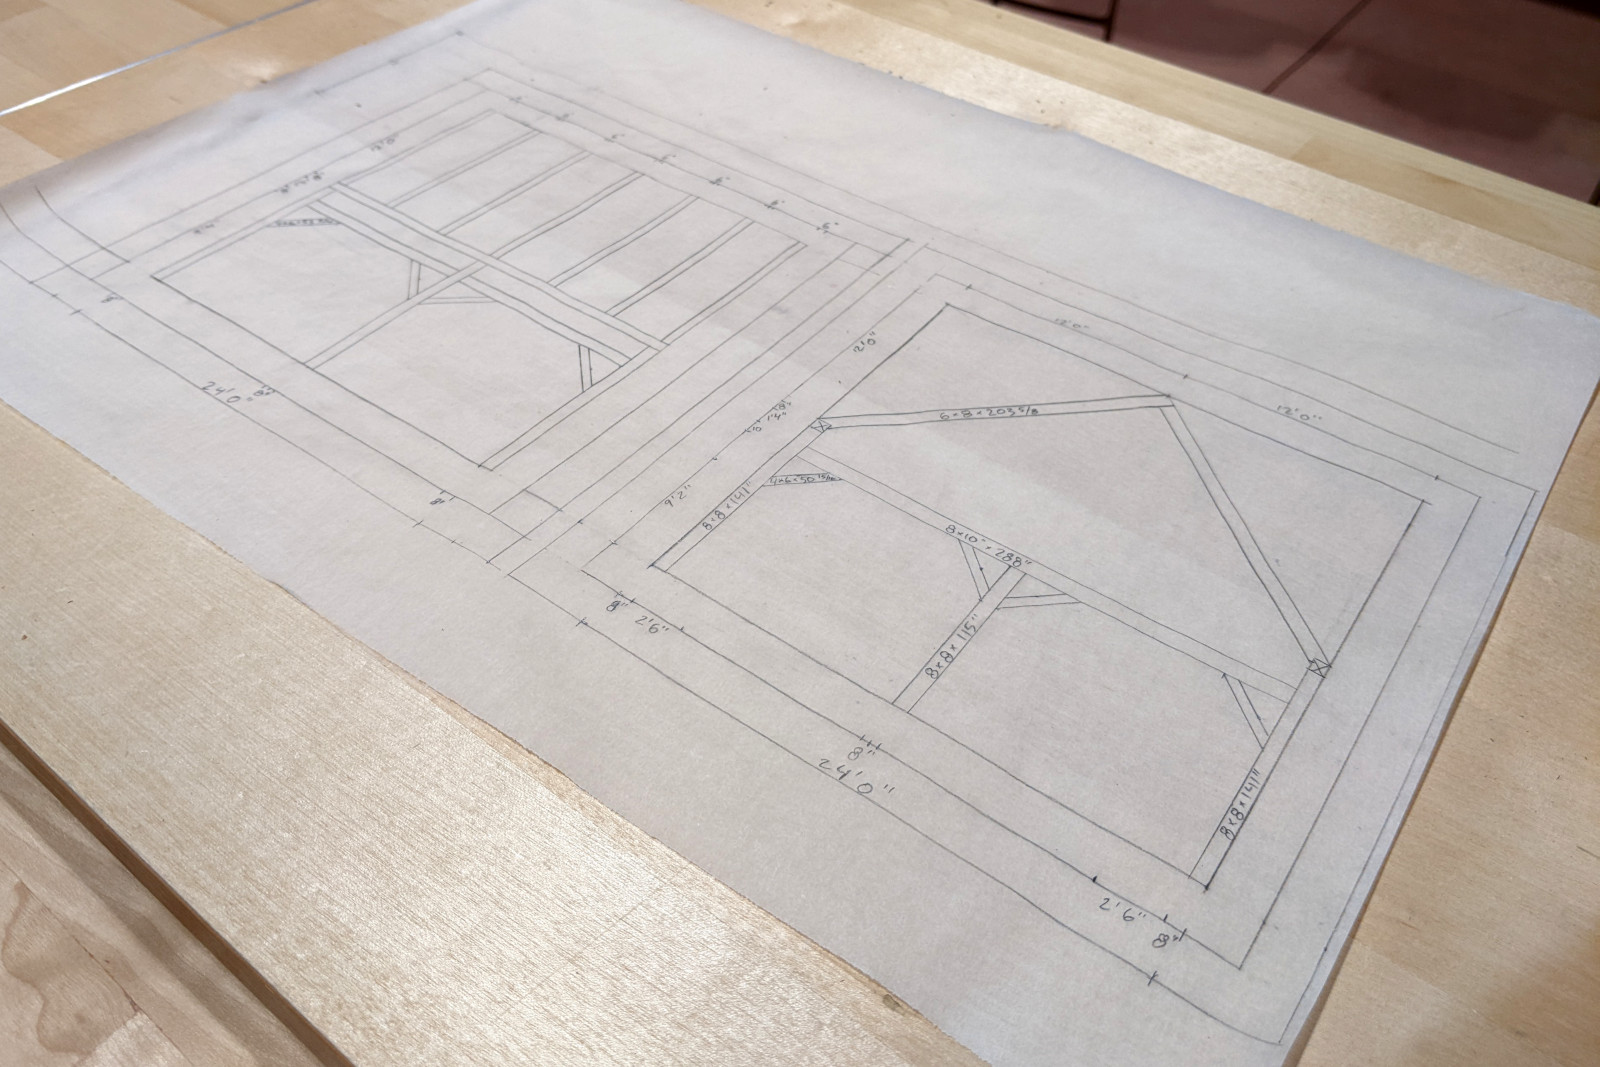 Drafting timber frame elevations on day 1 of Shelter Institute's Purely Post & Beam class